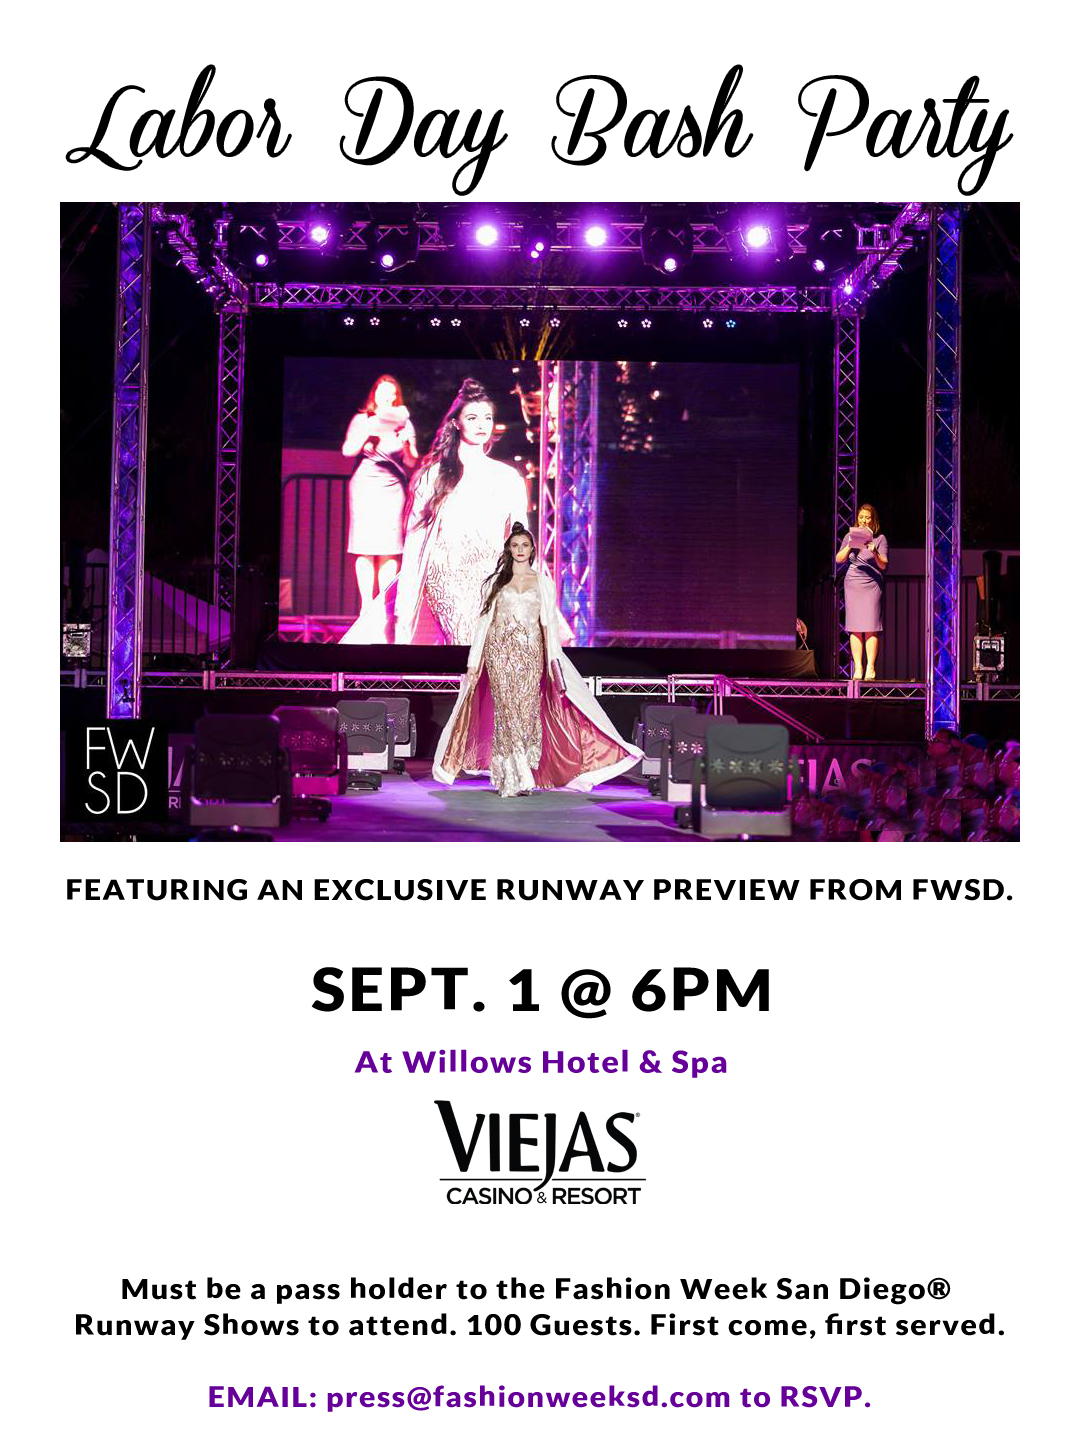 Labor Day Bash Party featuring an exclusive FWSD Runway Preview.